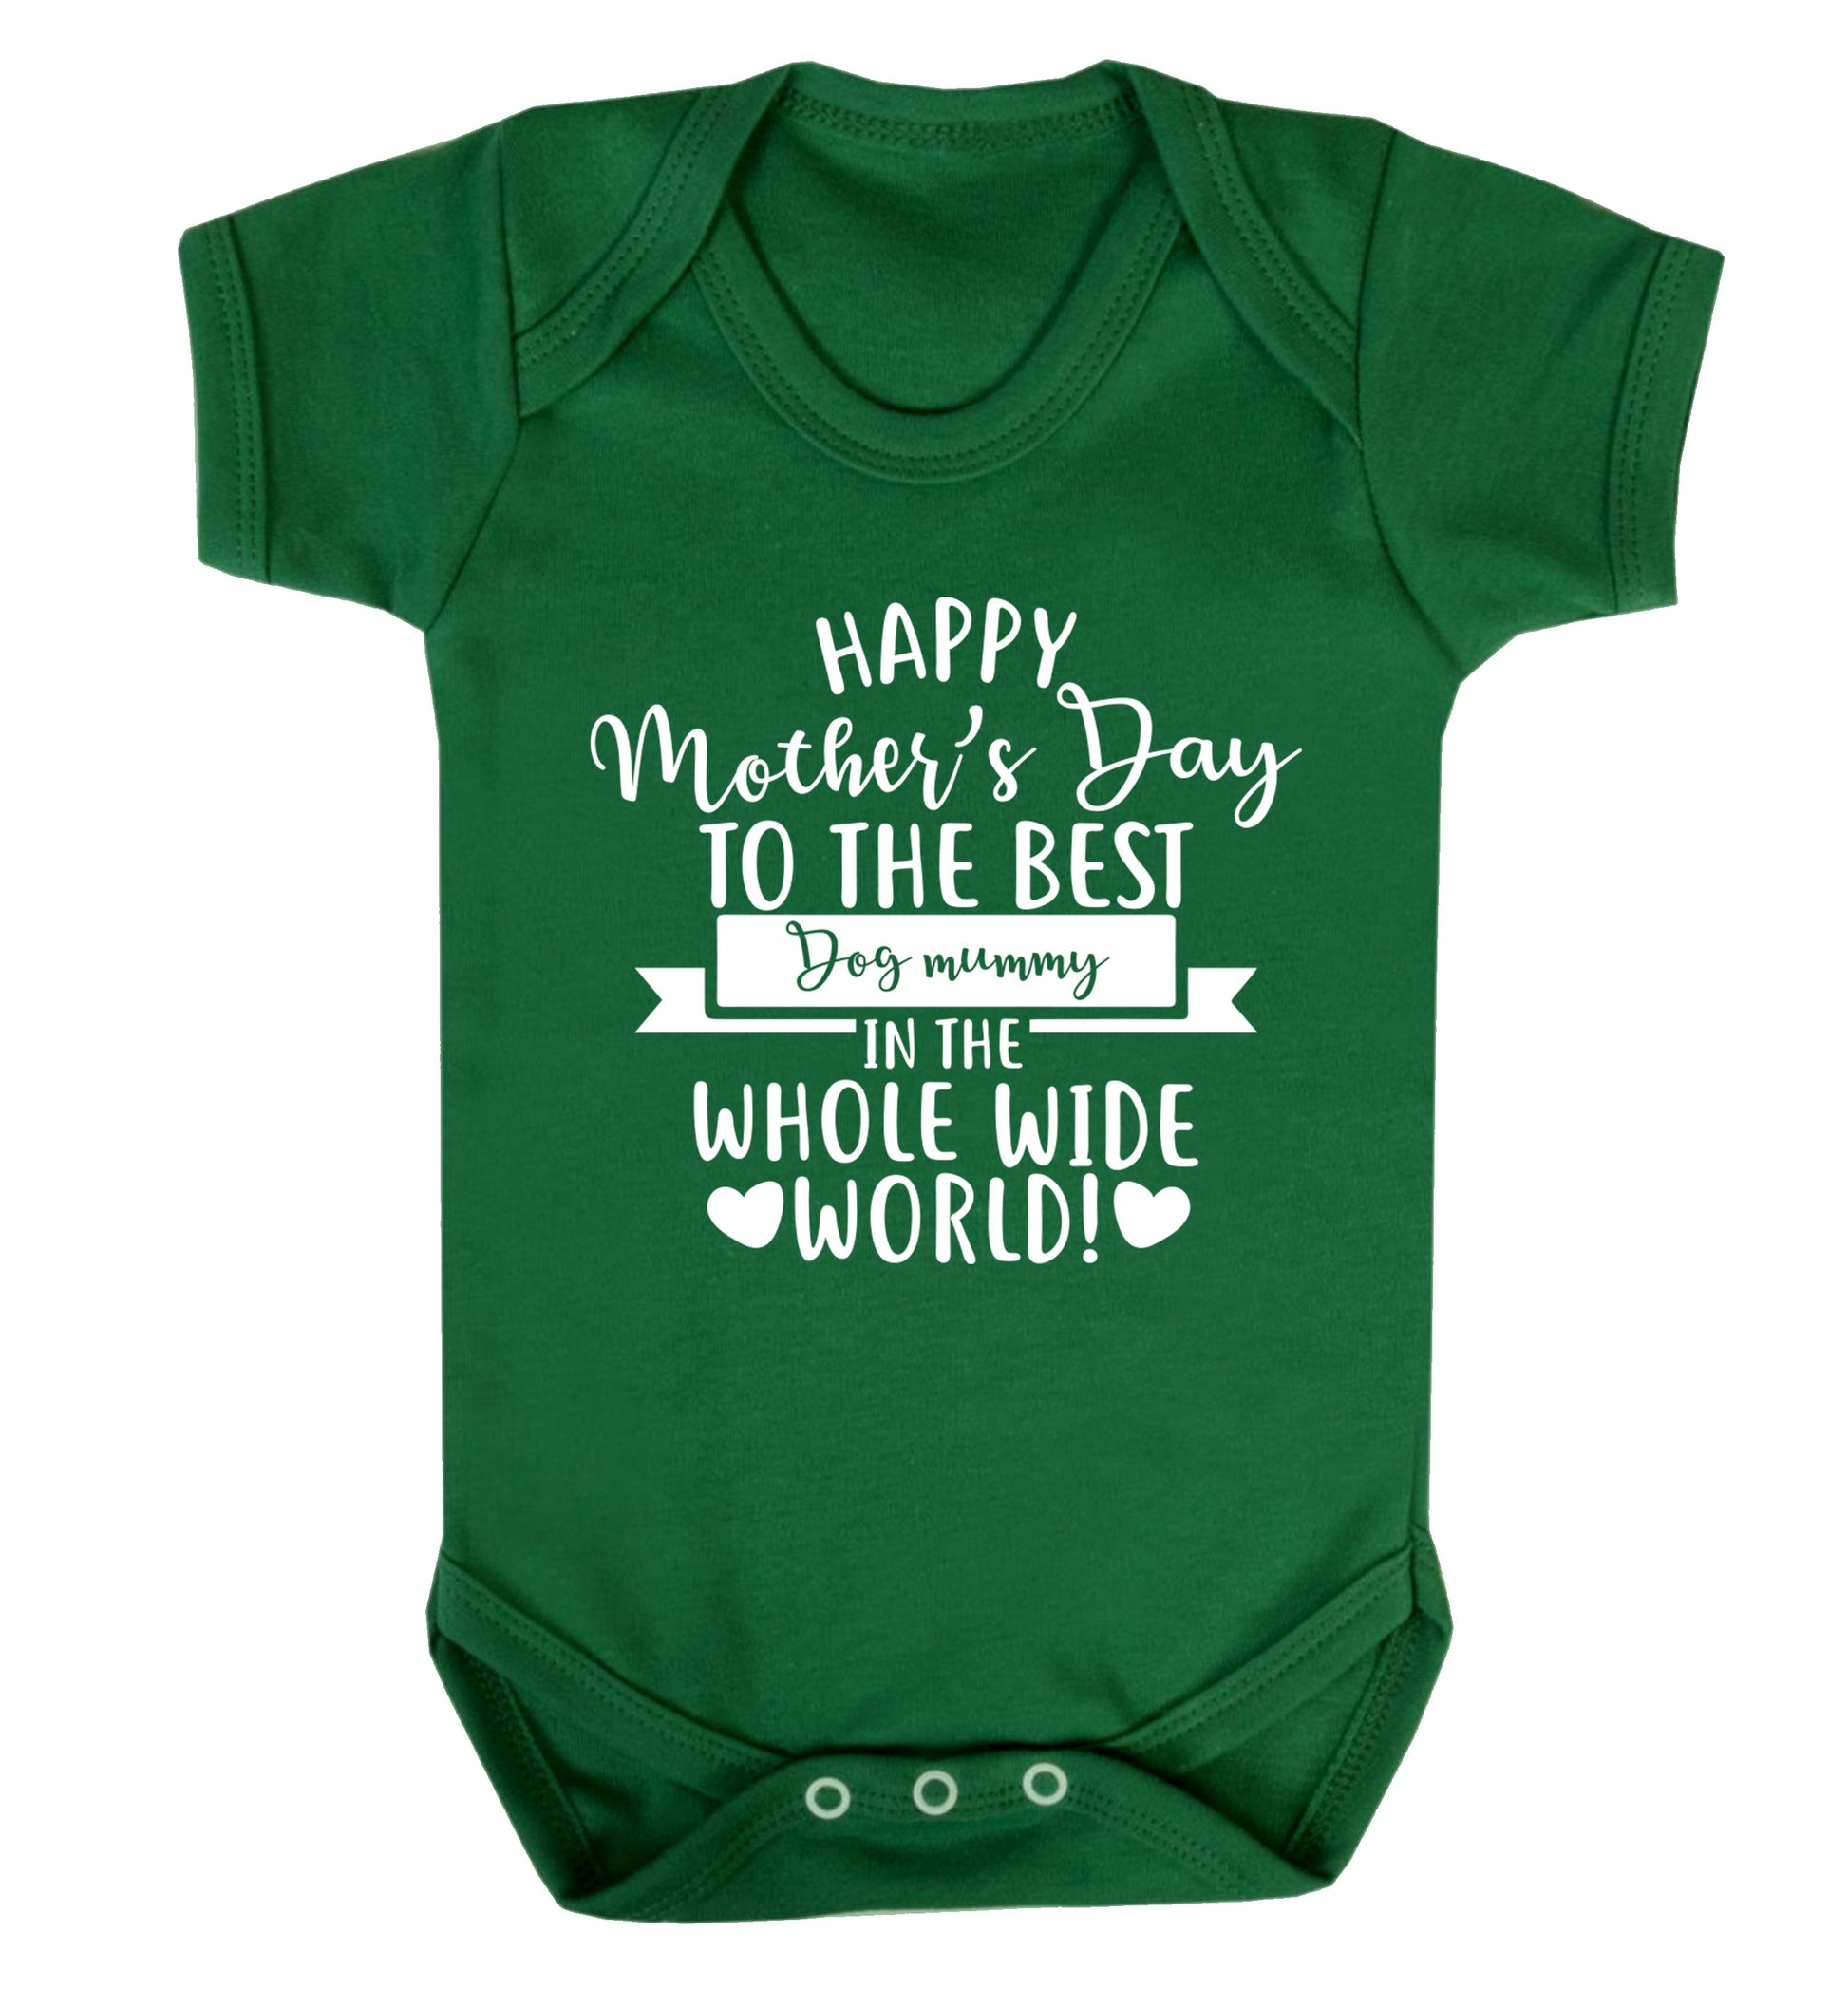 Happy mother's day to the best dog mummy in the world Baby Vest green 18-24 months